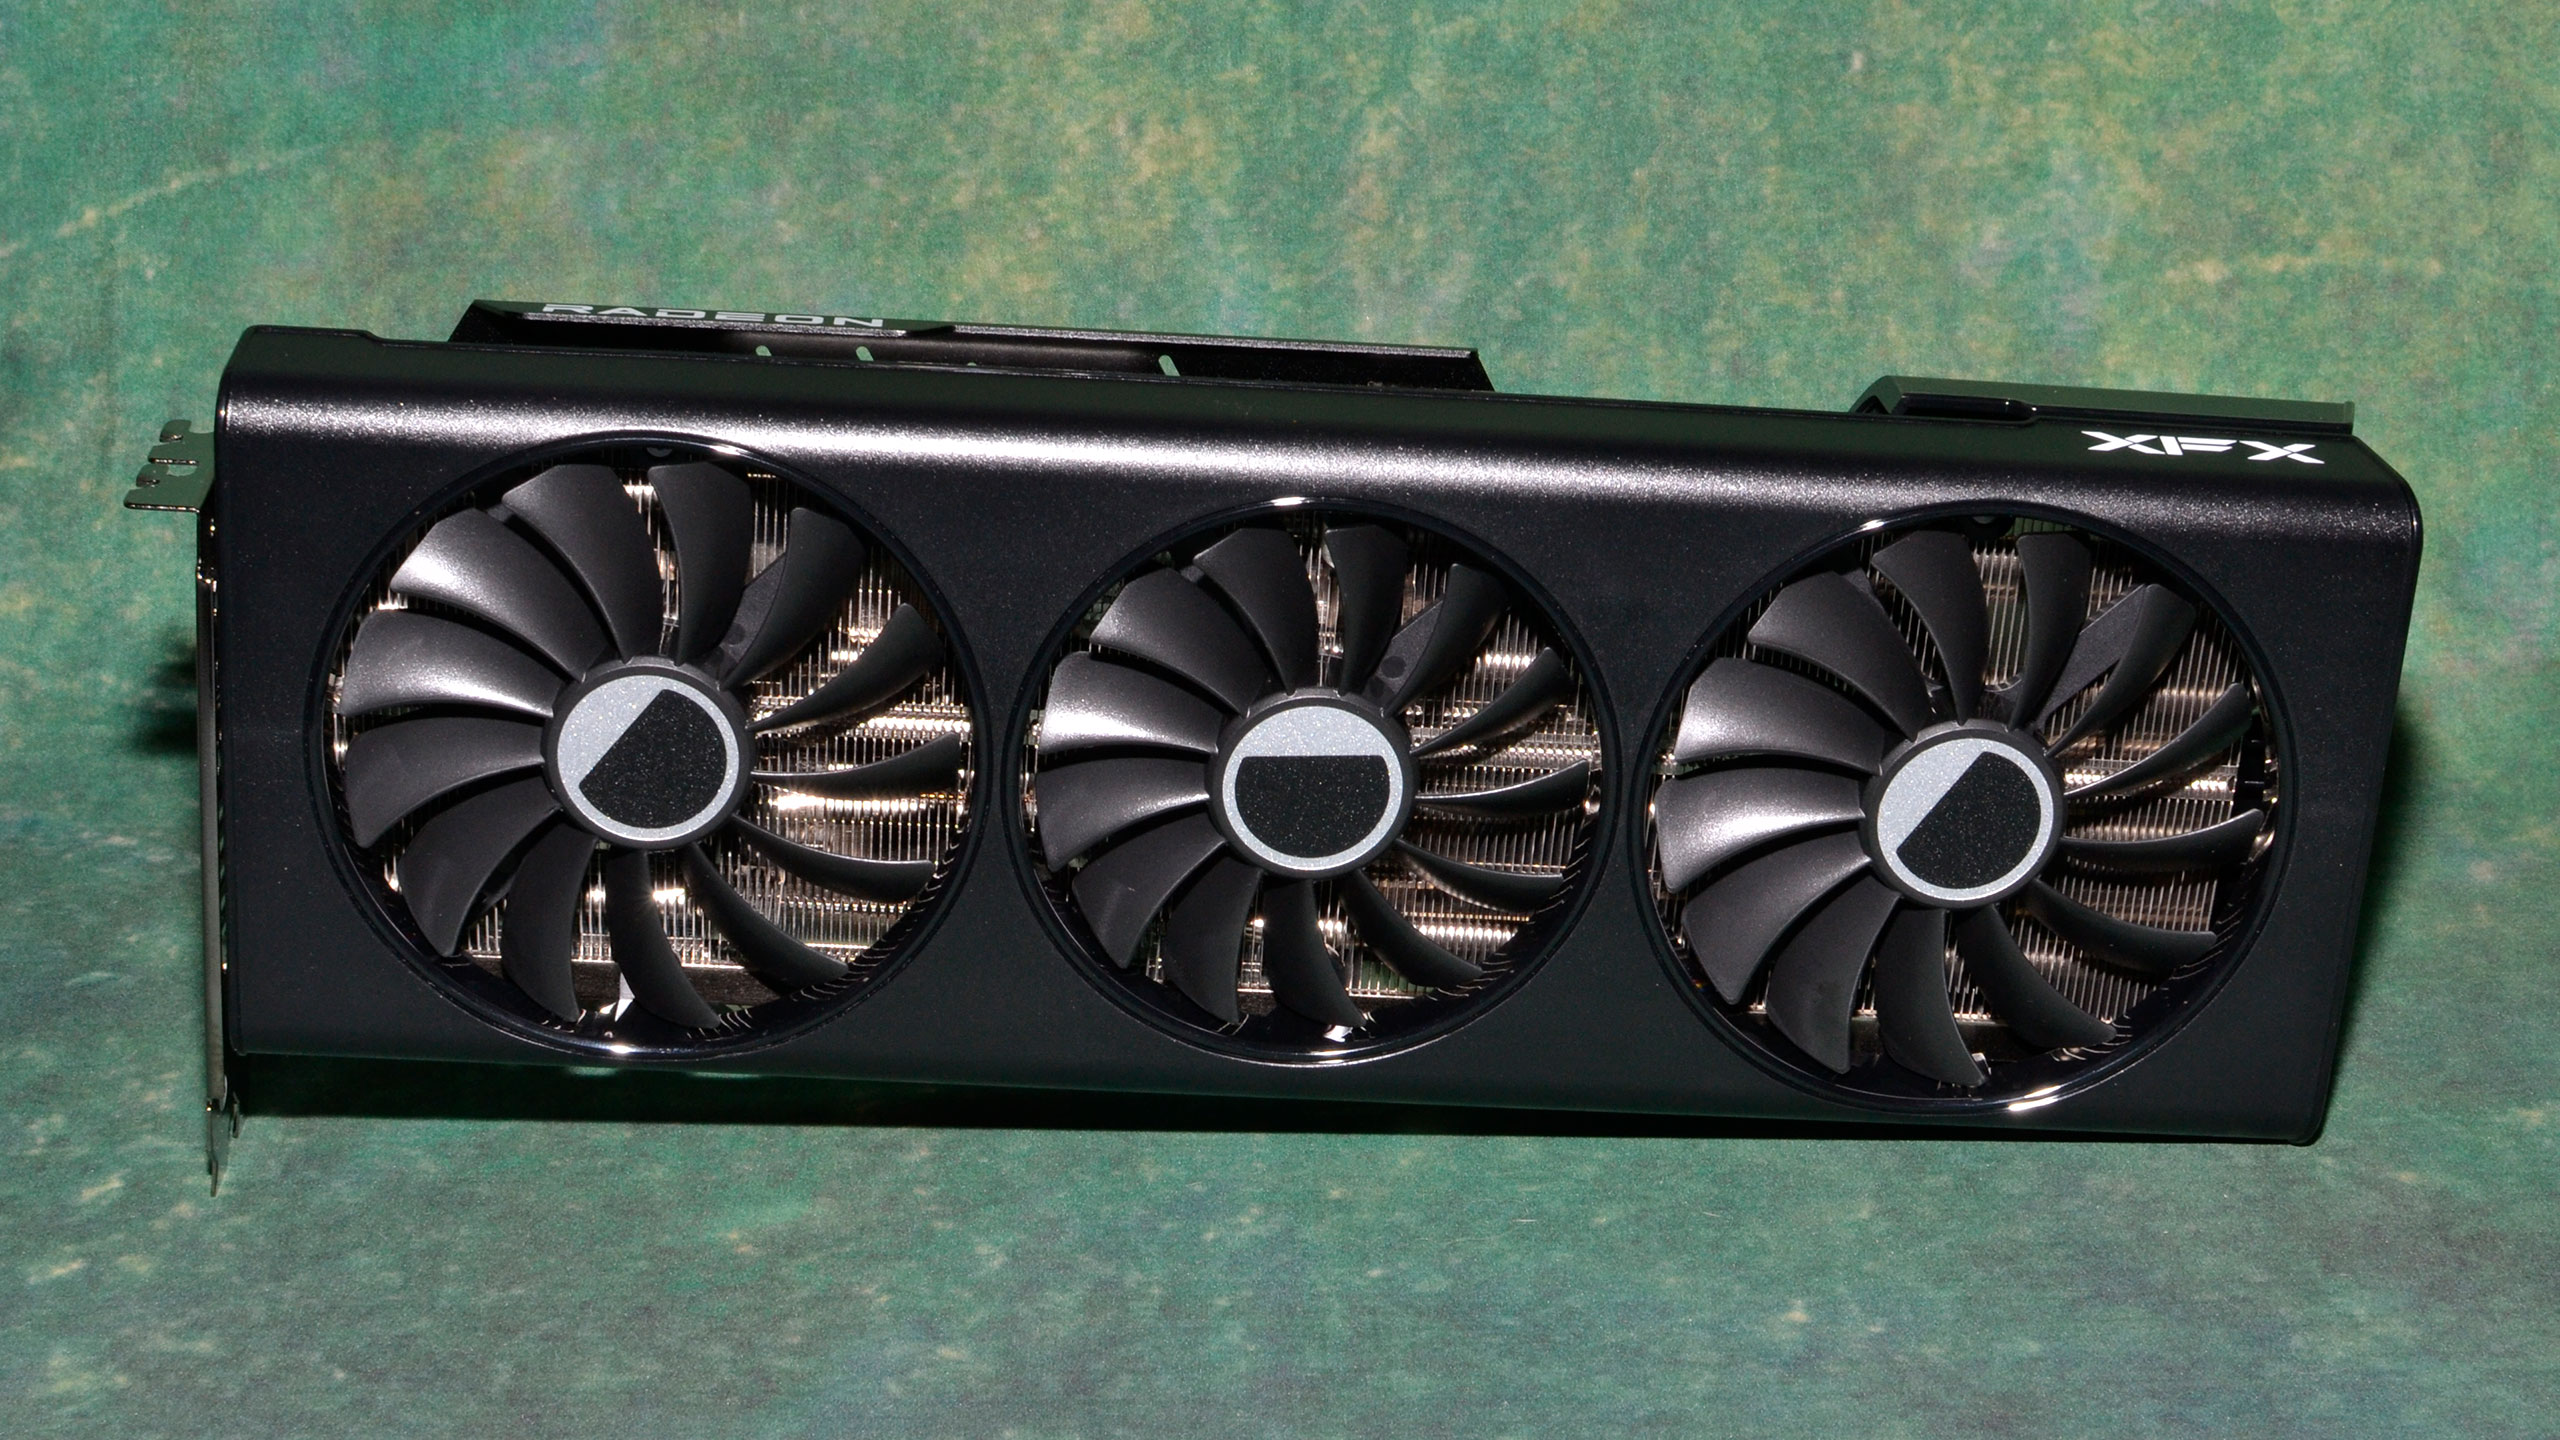 AMD Radeon RX 6700 XT To Get Two Variants Based on Navi 22 GPU - RX 6700  Launching in April